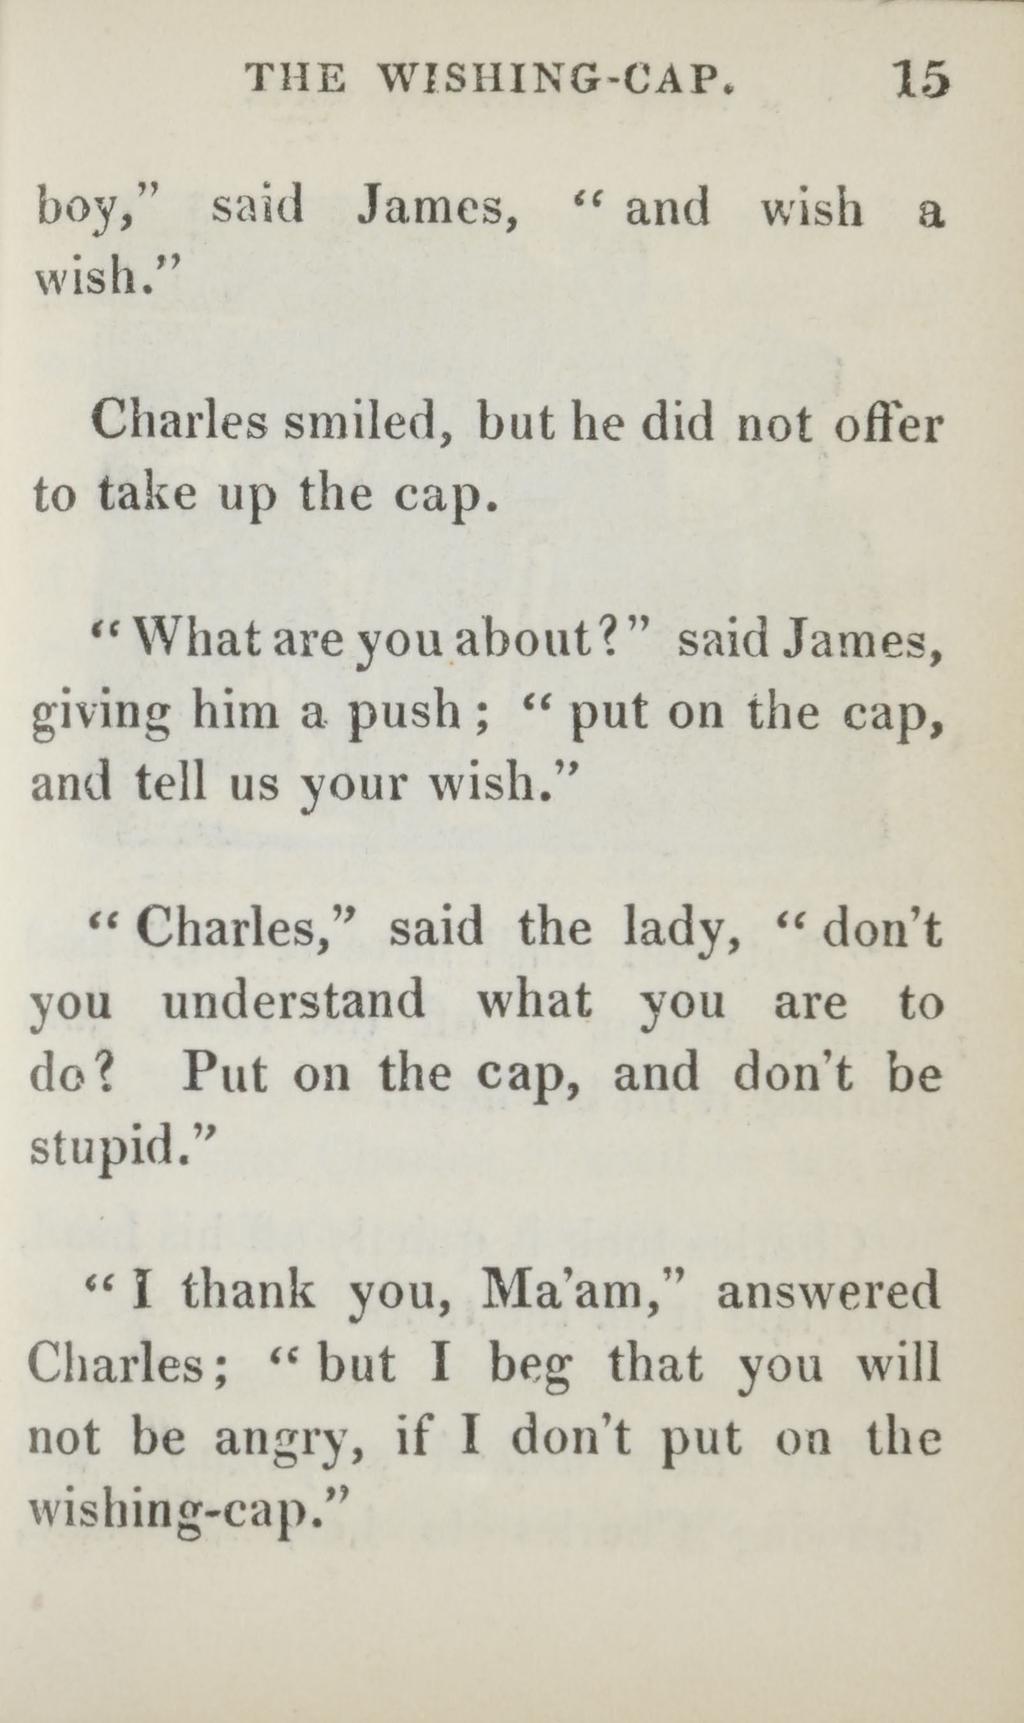 THE WISHING-CAP. 15 boy, said James, " and wish a wish. Charles smiled, but he did not offer to take up the cap. What are you about?